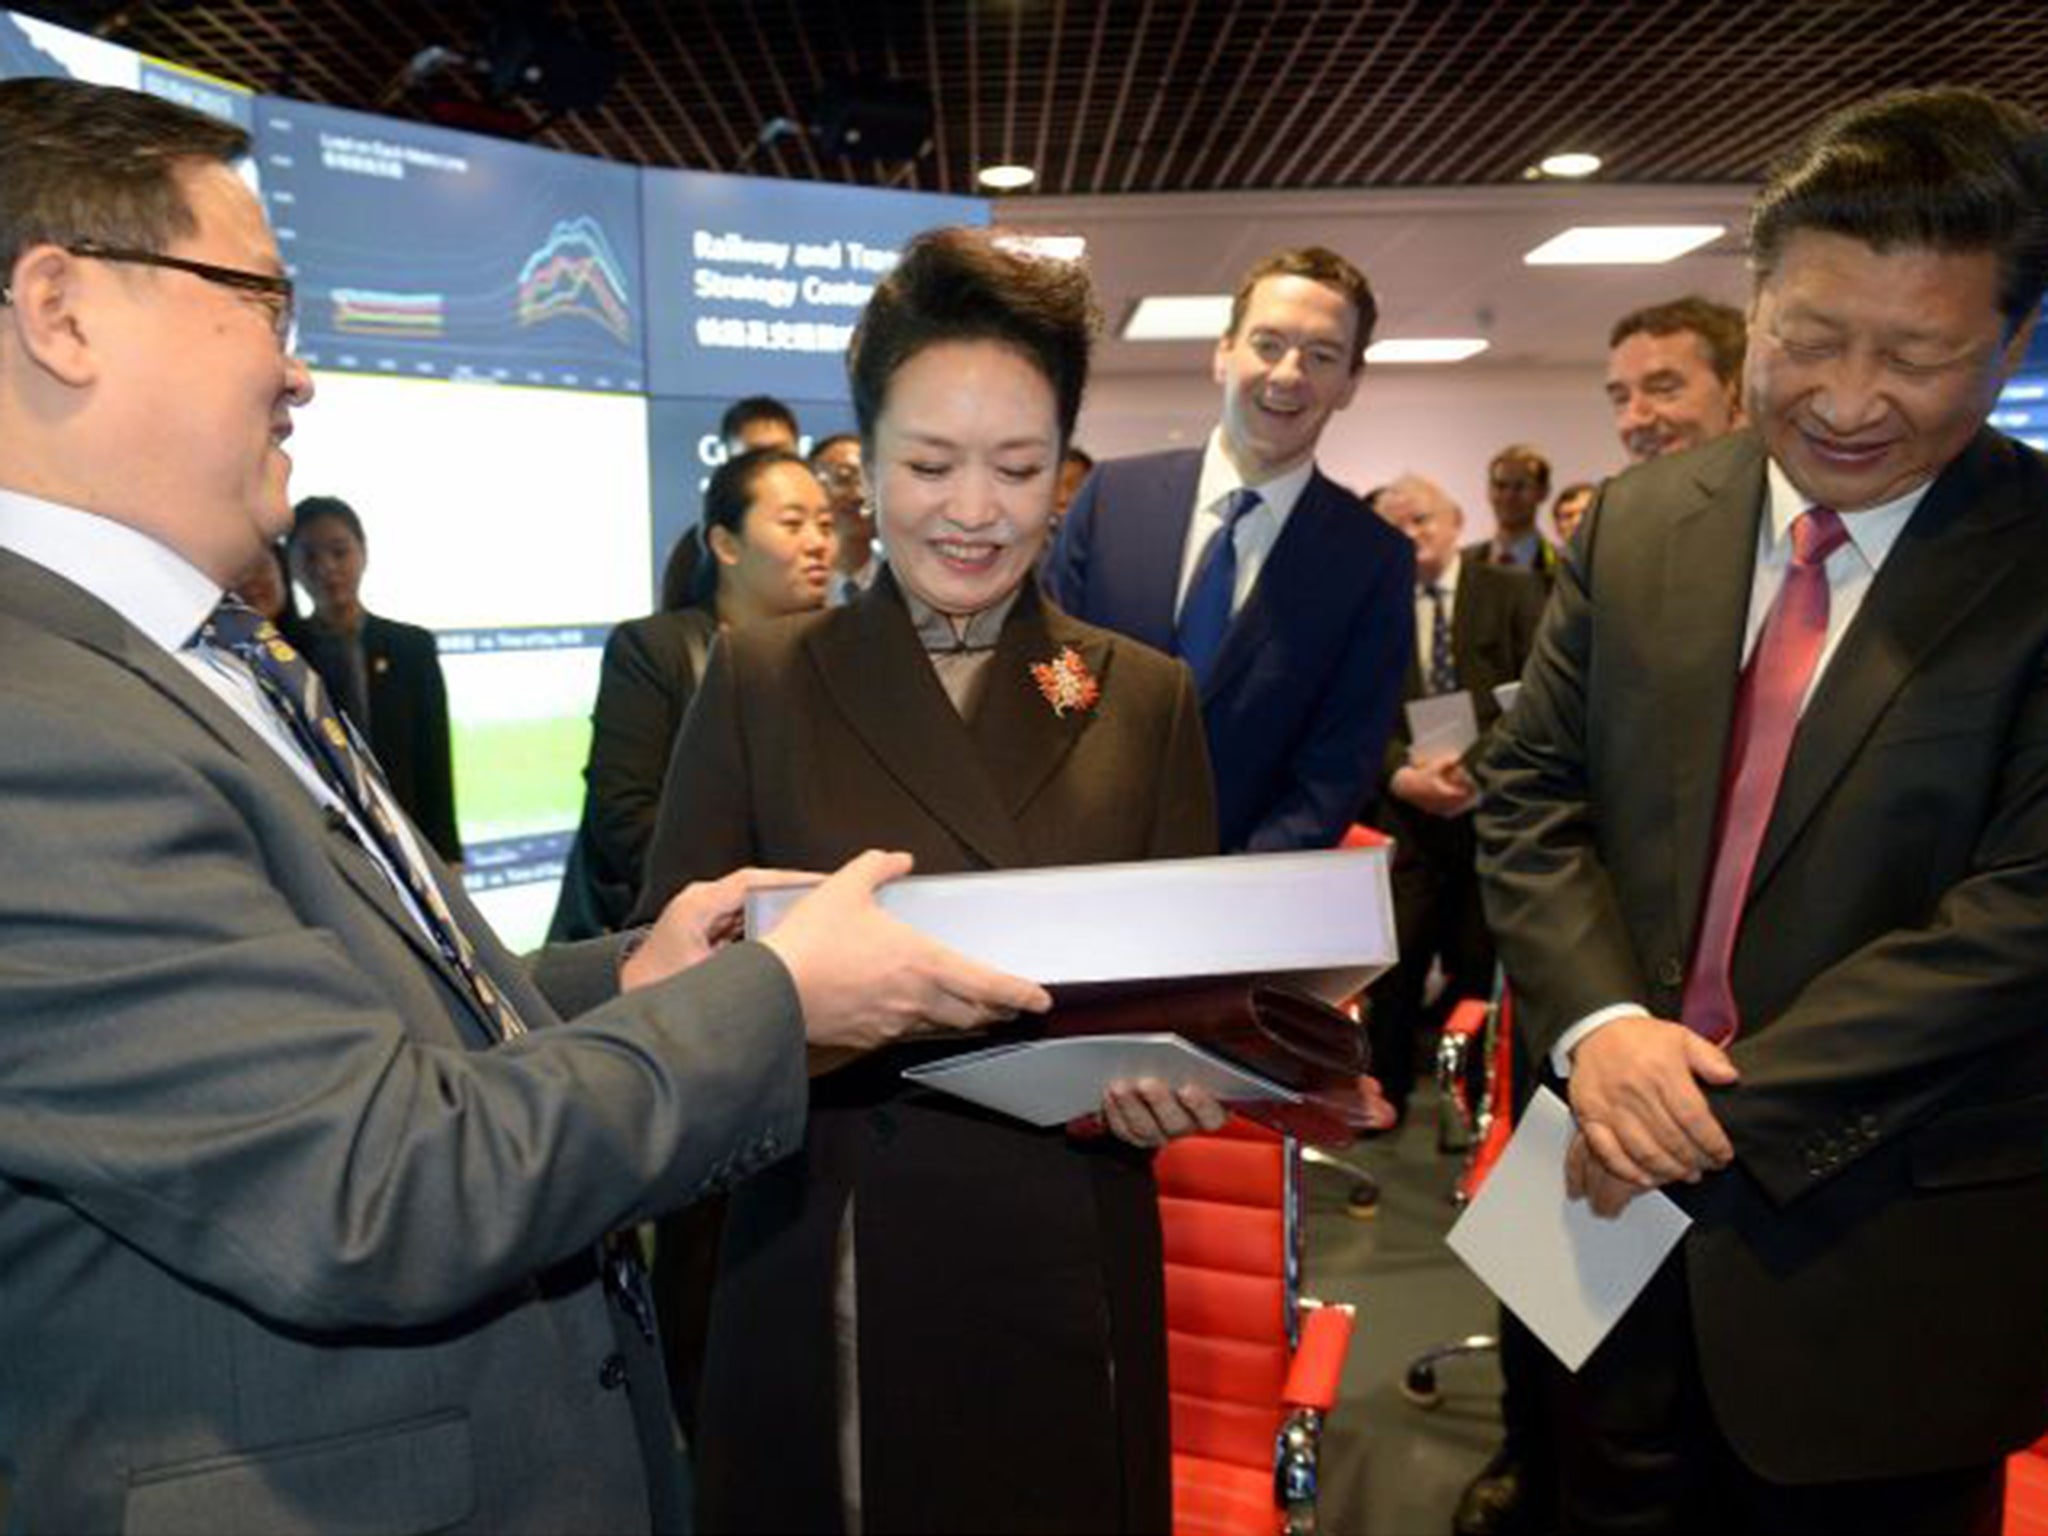 Chinese President Xi Jinping is presented a gift during his visit to Imperial College London in October